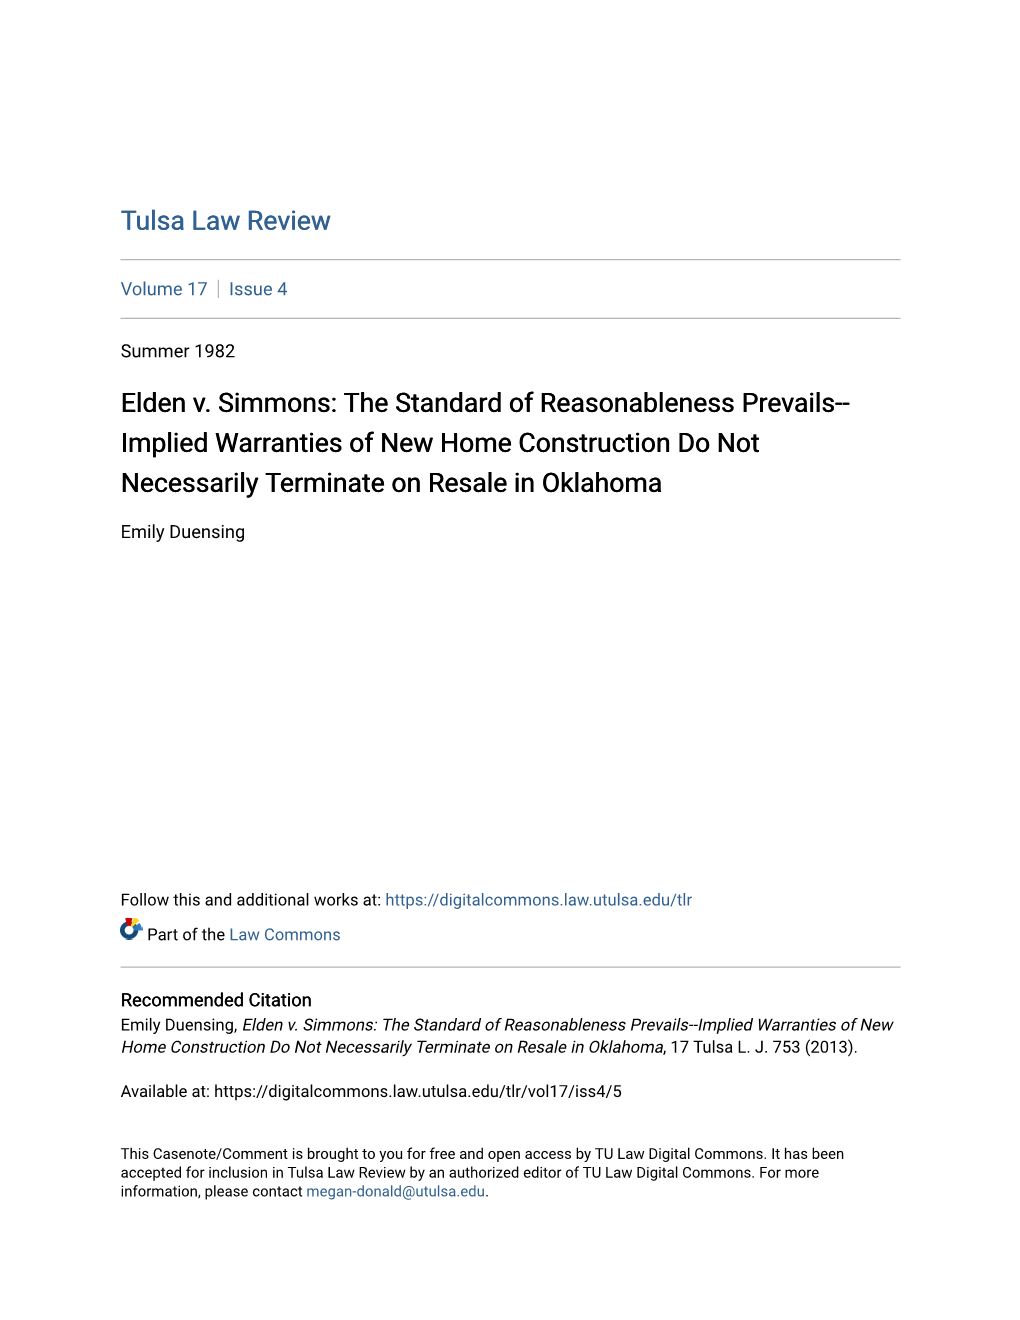 Implied Warranties of New Home Construction Do Not Necessarily Terminate on Resale in Oklahoma